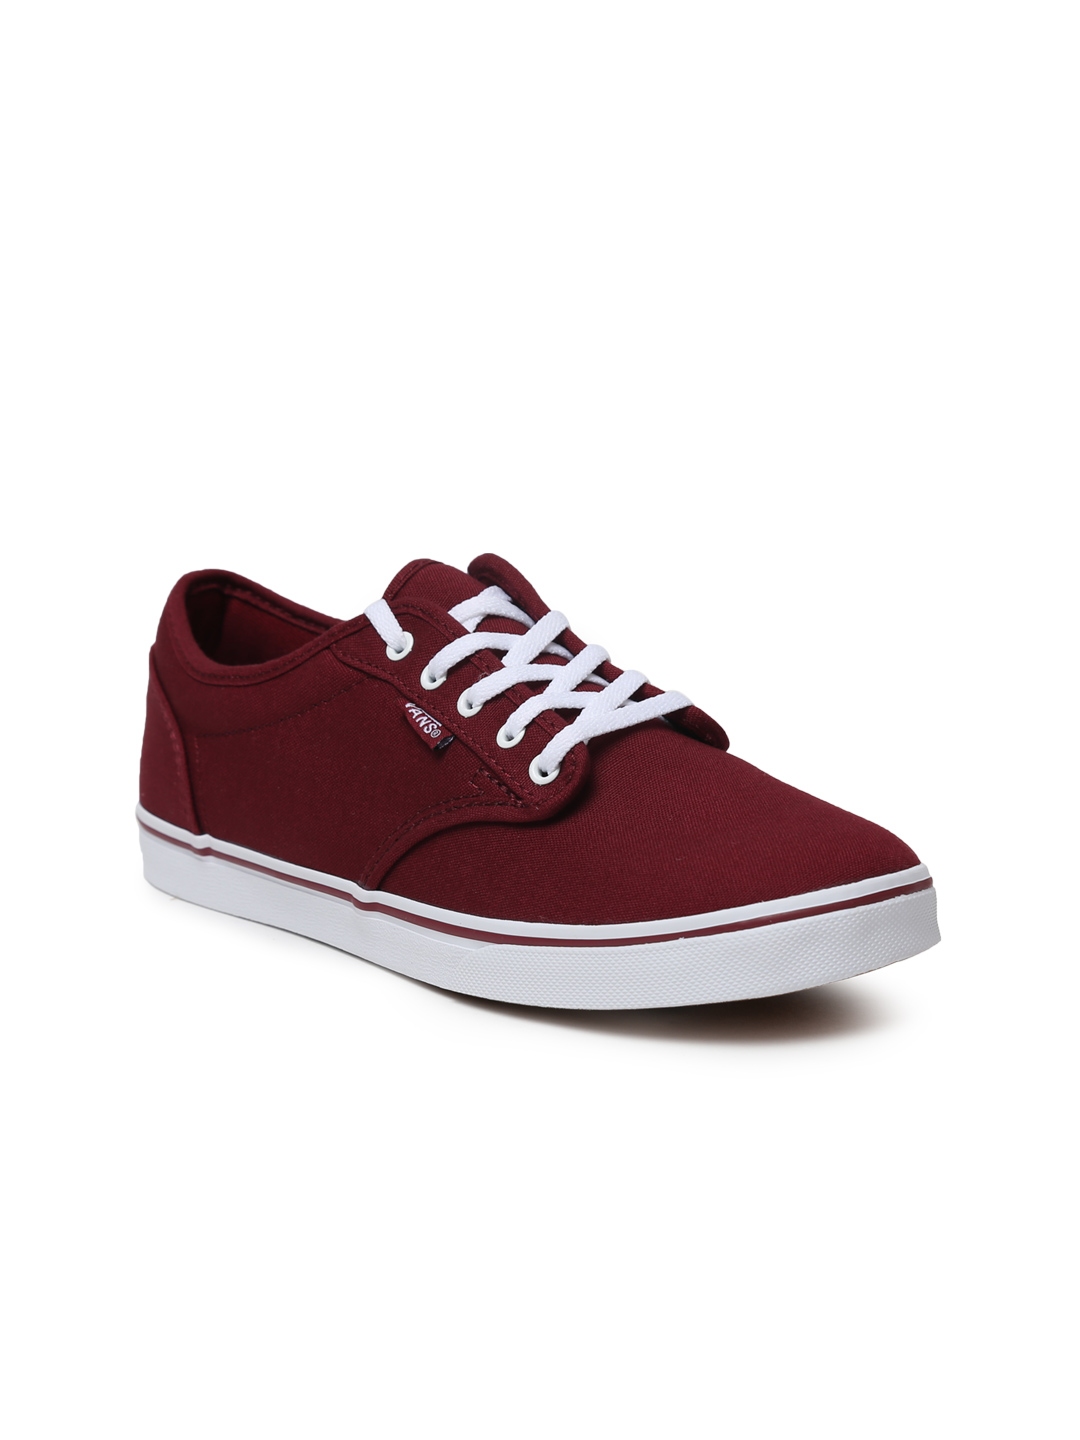 78 Casual Burgundy vans shoes womens for Girls